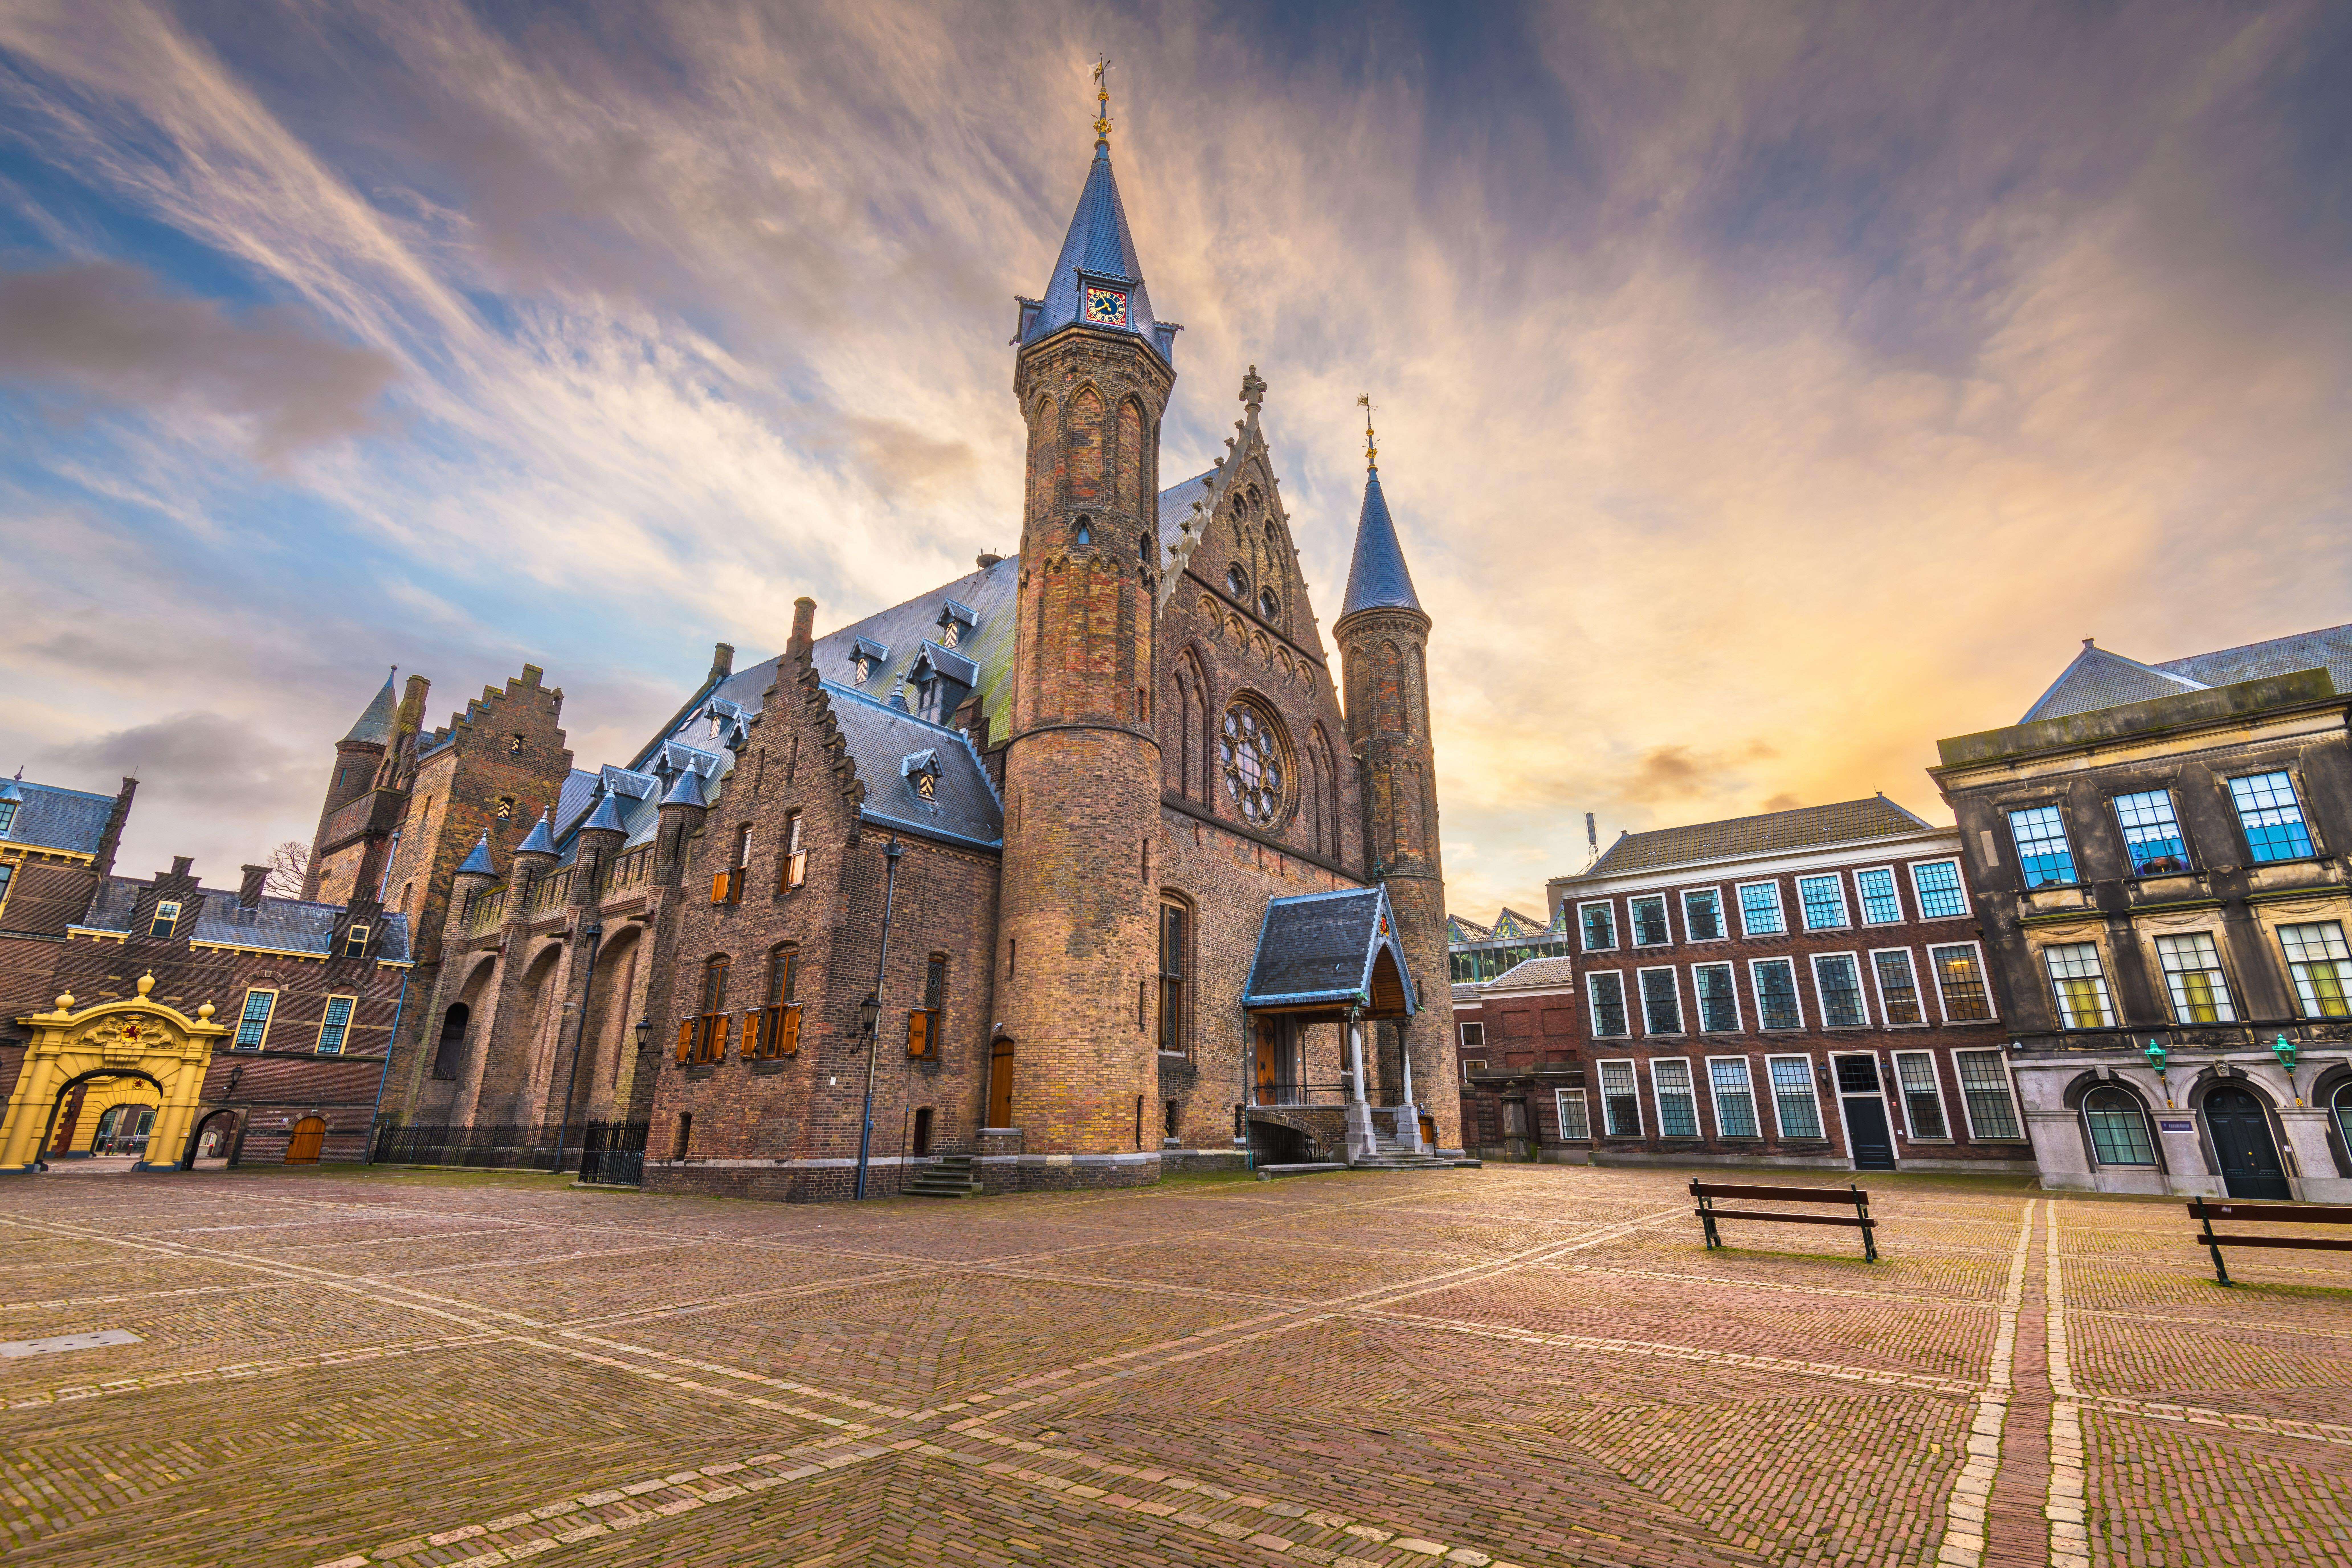 The Hague, Netherlands at the Ridderzaal during morningtime.